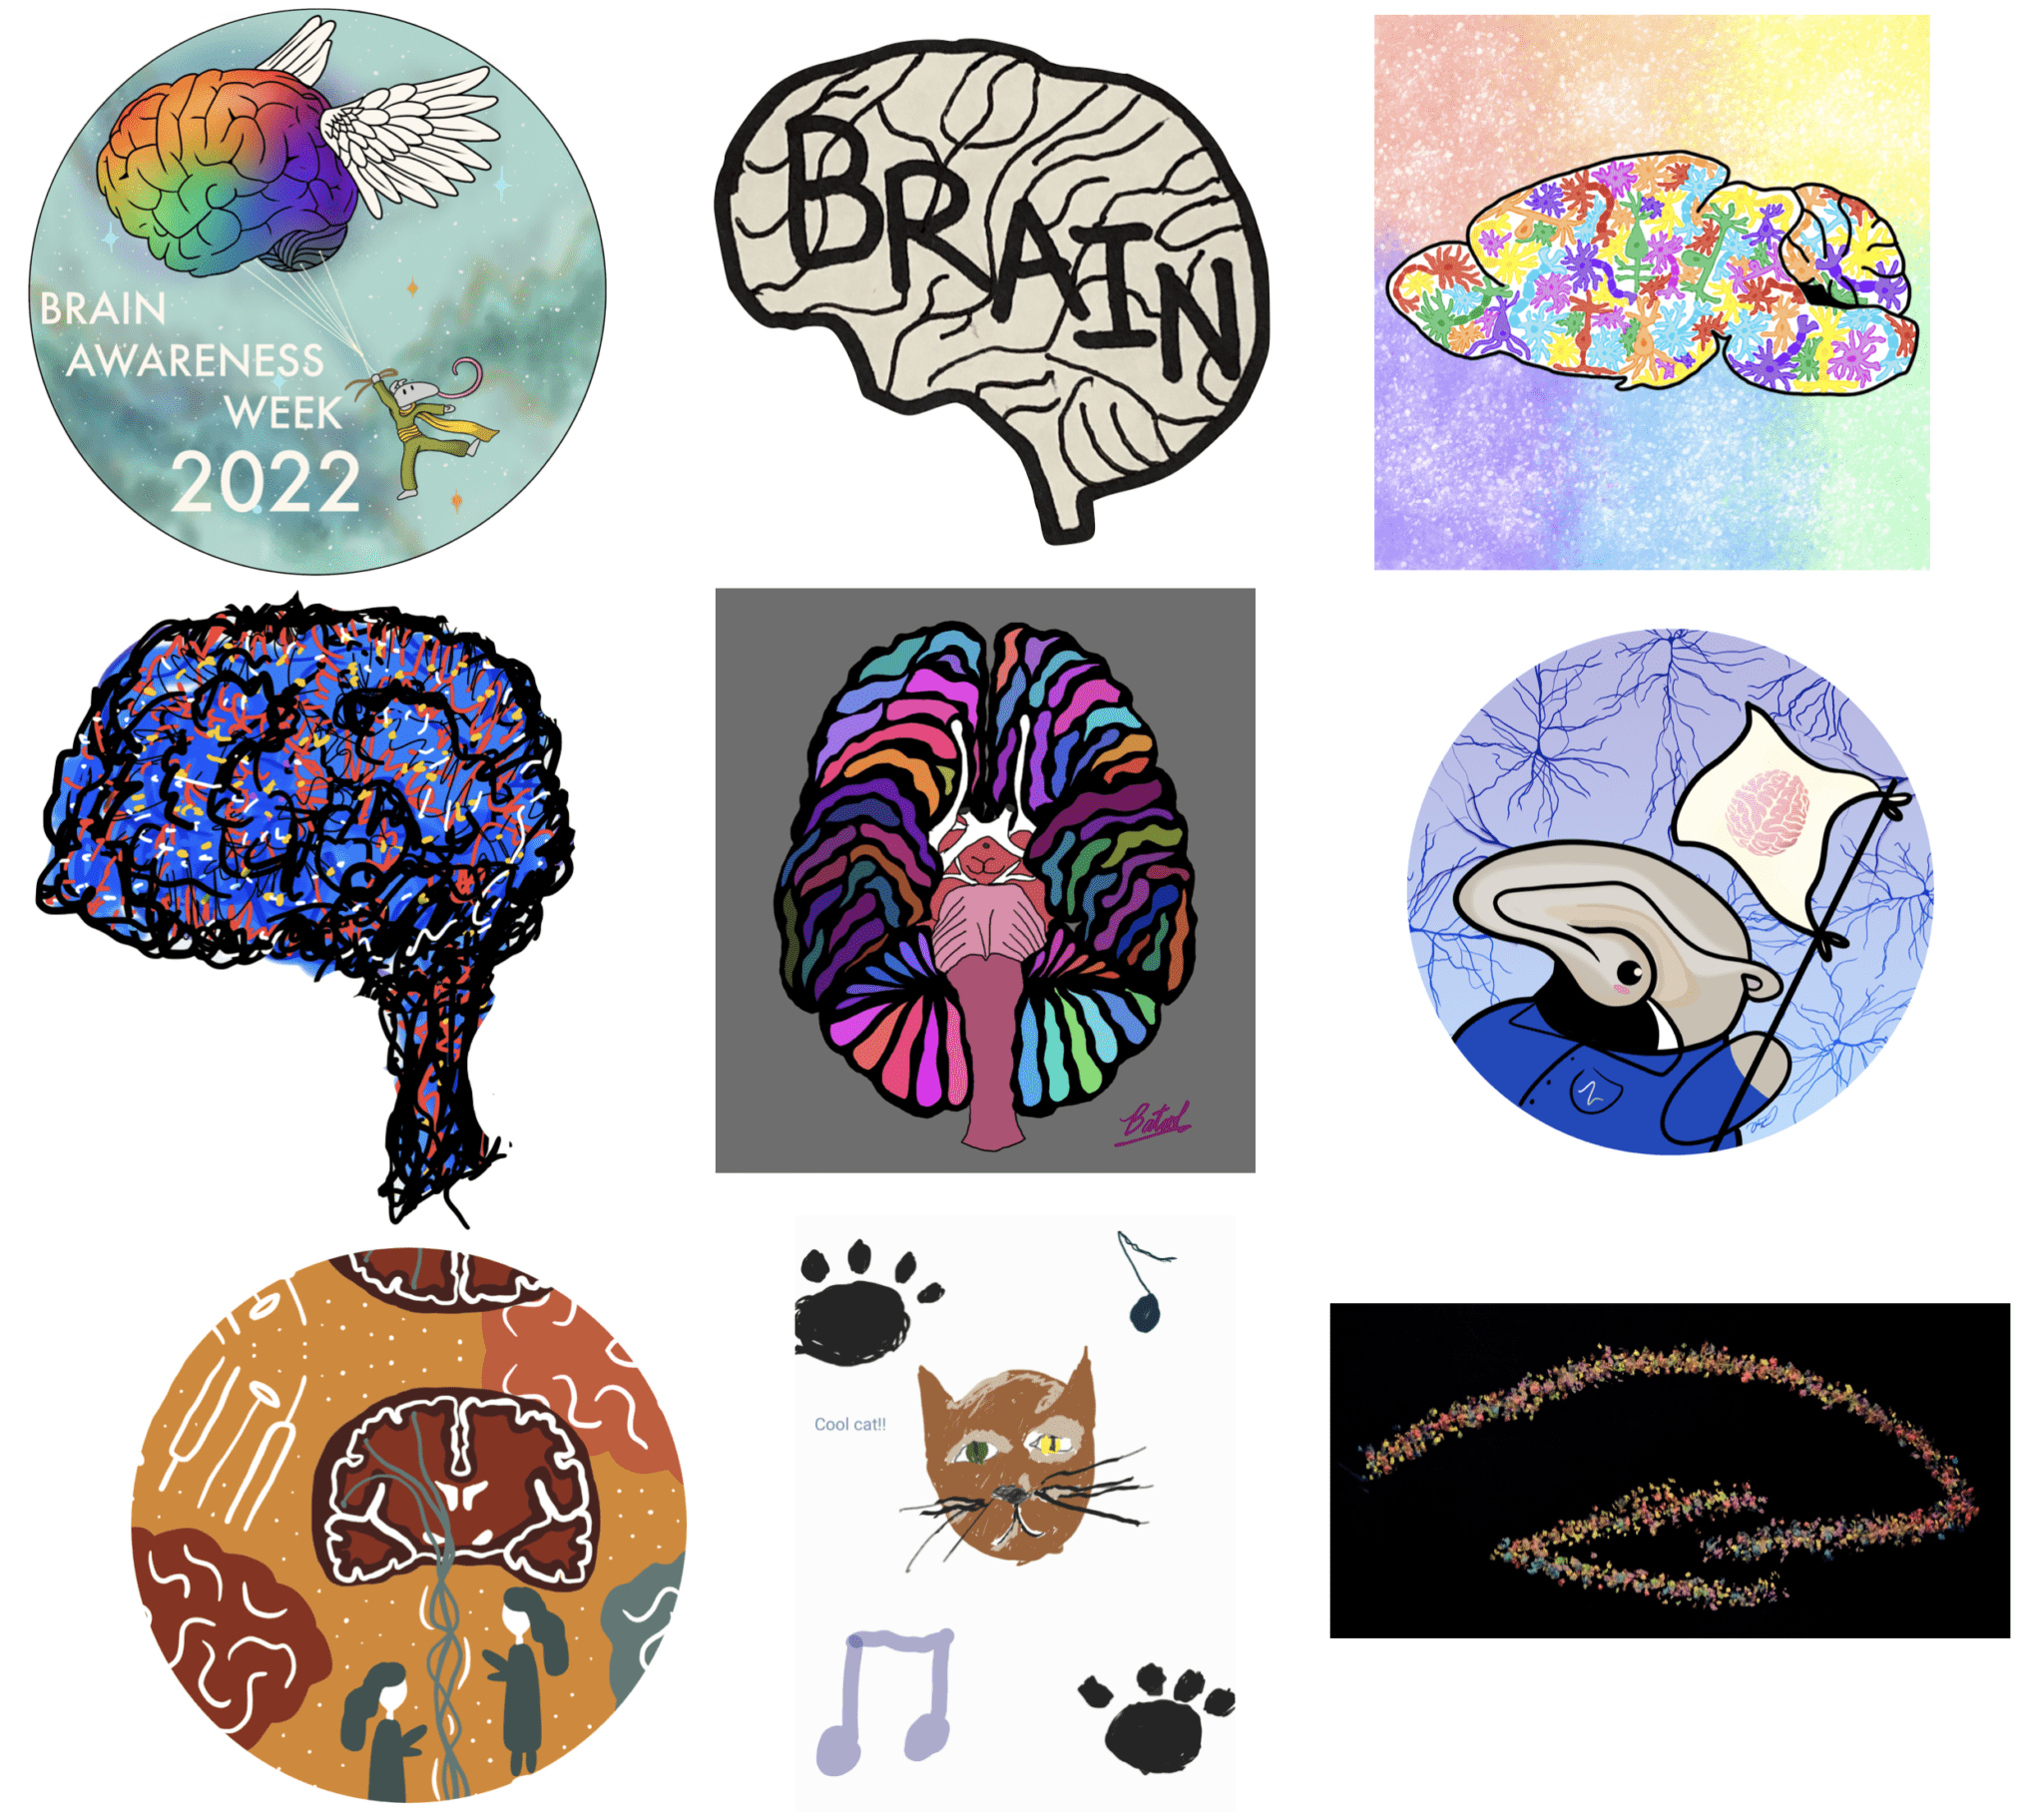 2022 Brain Awareness Week Sticker Competition - Image of 9 stickers with themes of Brains, neuroscience, human memory, brain memory, and brain research